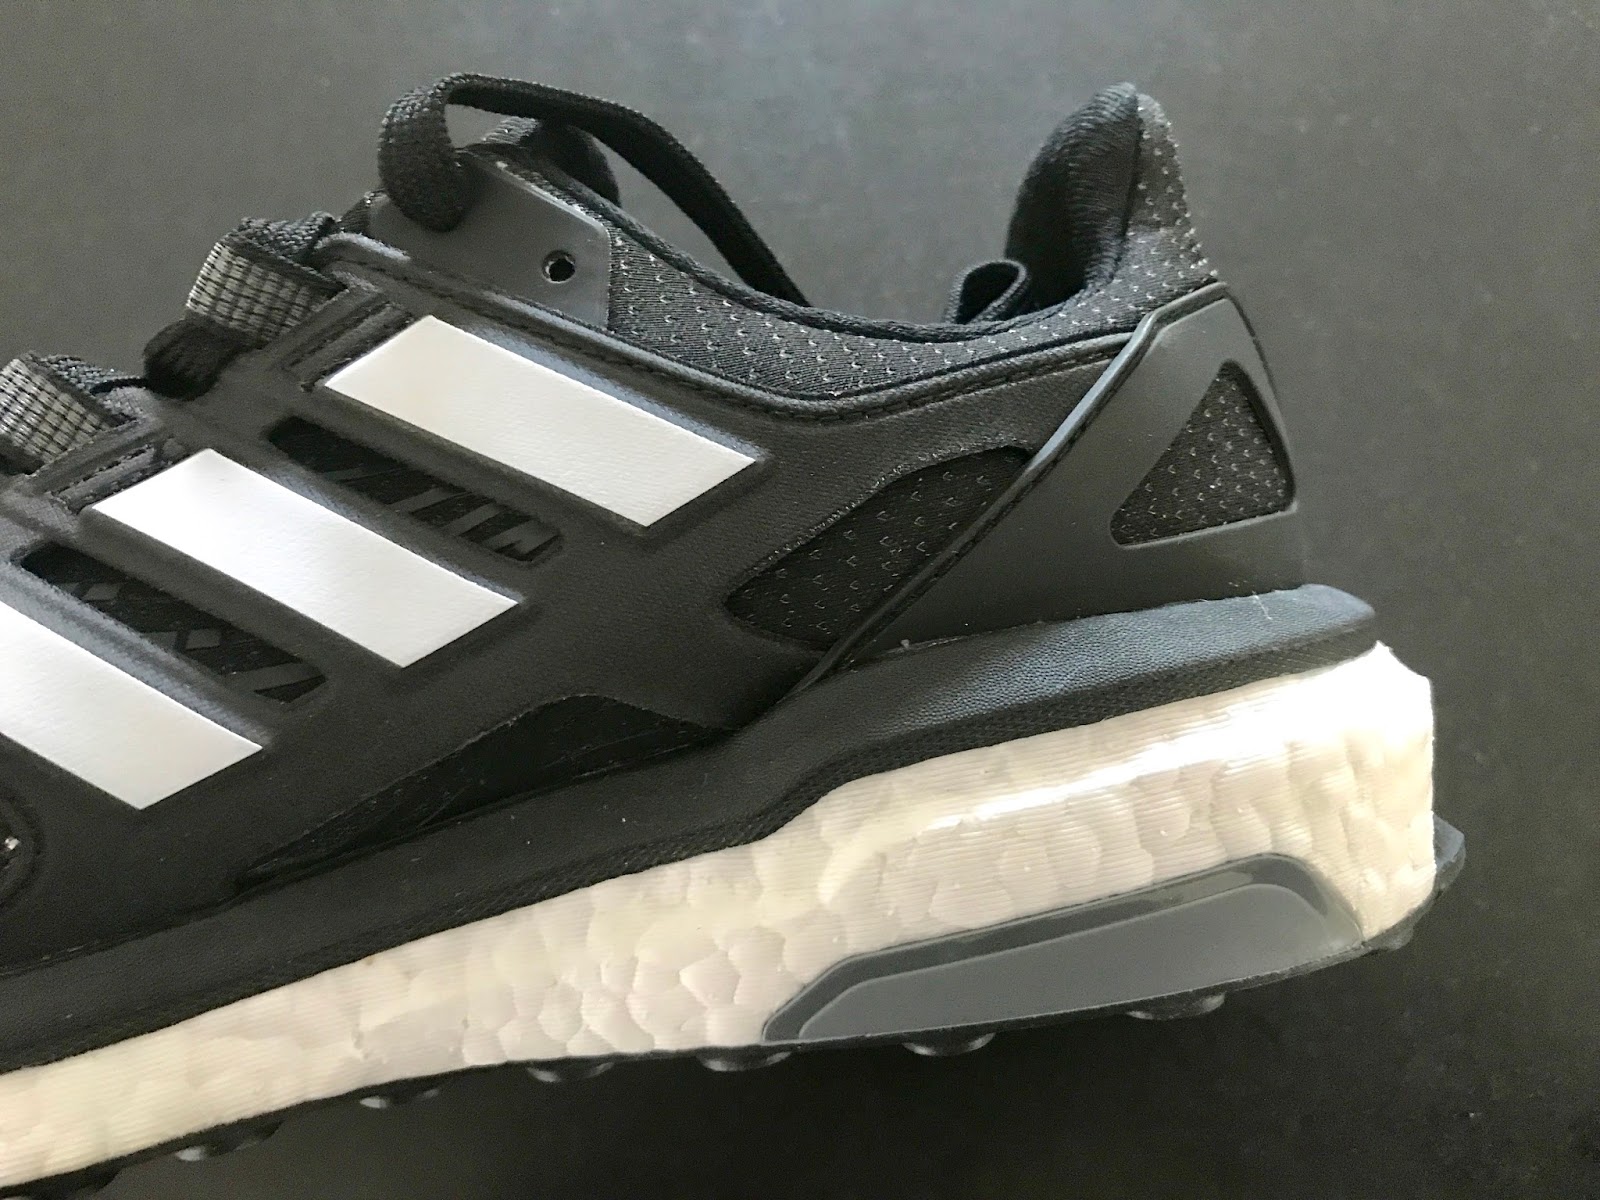 Road Trail Run: 2017 adidas Energy Boost (4): Luxury German SUV. Looks and Stats Deceiving!